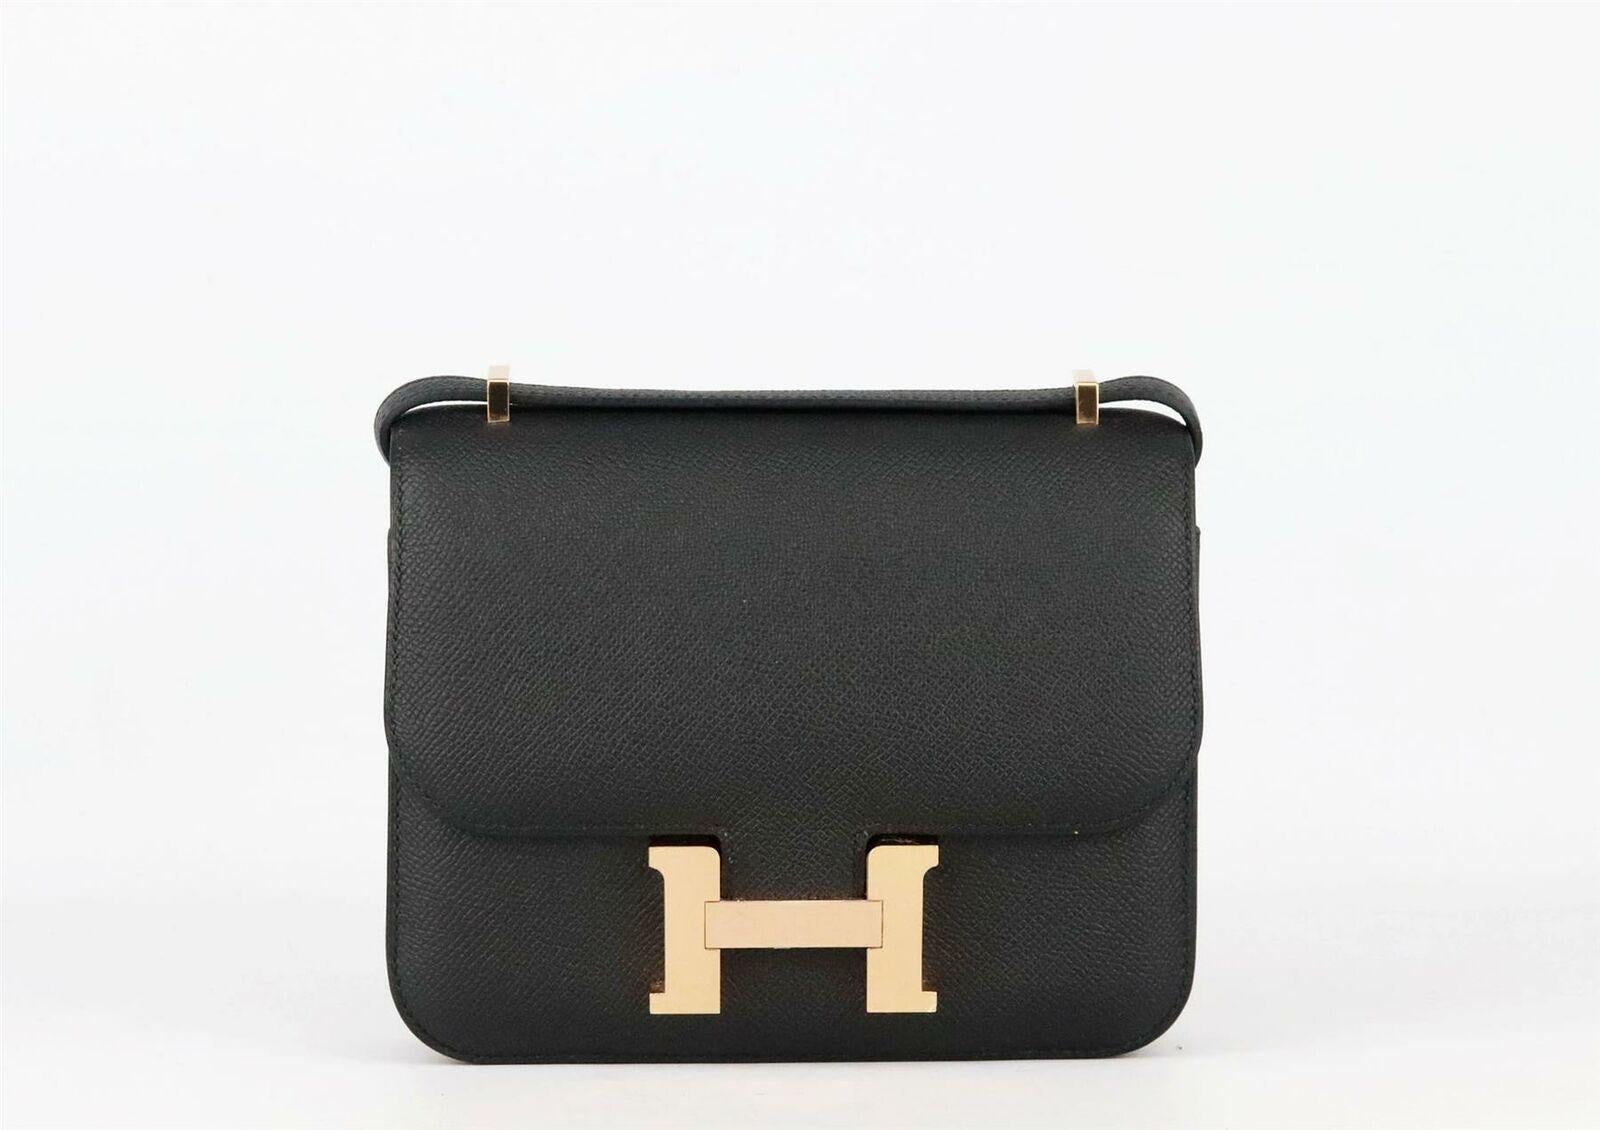 Made in France, this beautiful 2020 Hermès ‘Constance’ 19cm shoulder bag has been made from textured Epsom leather exterior in ‘Noir’ and soft leather interior, it is decorated with rose gold H hardware on the front and finished with a flat leather